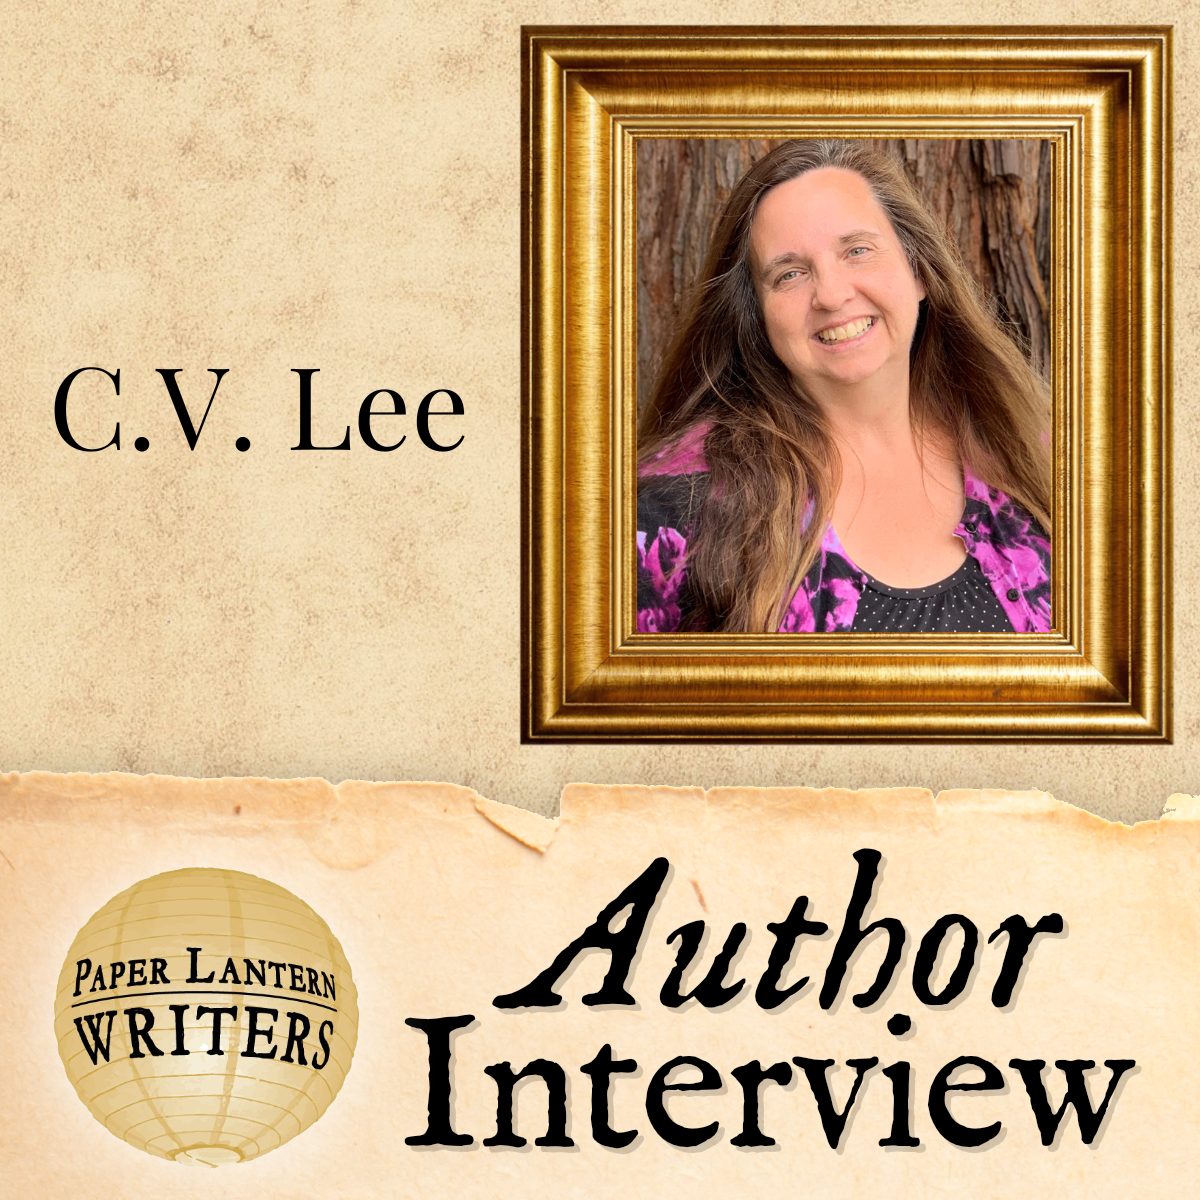 Interview with Paper Lantern Writer C. V. Lee